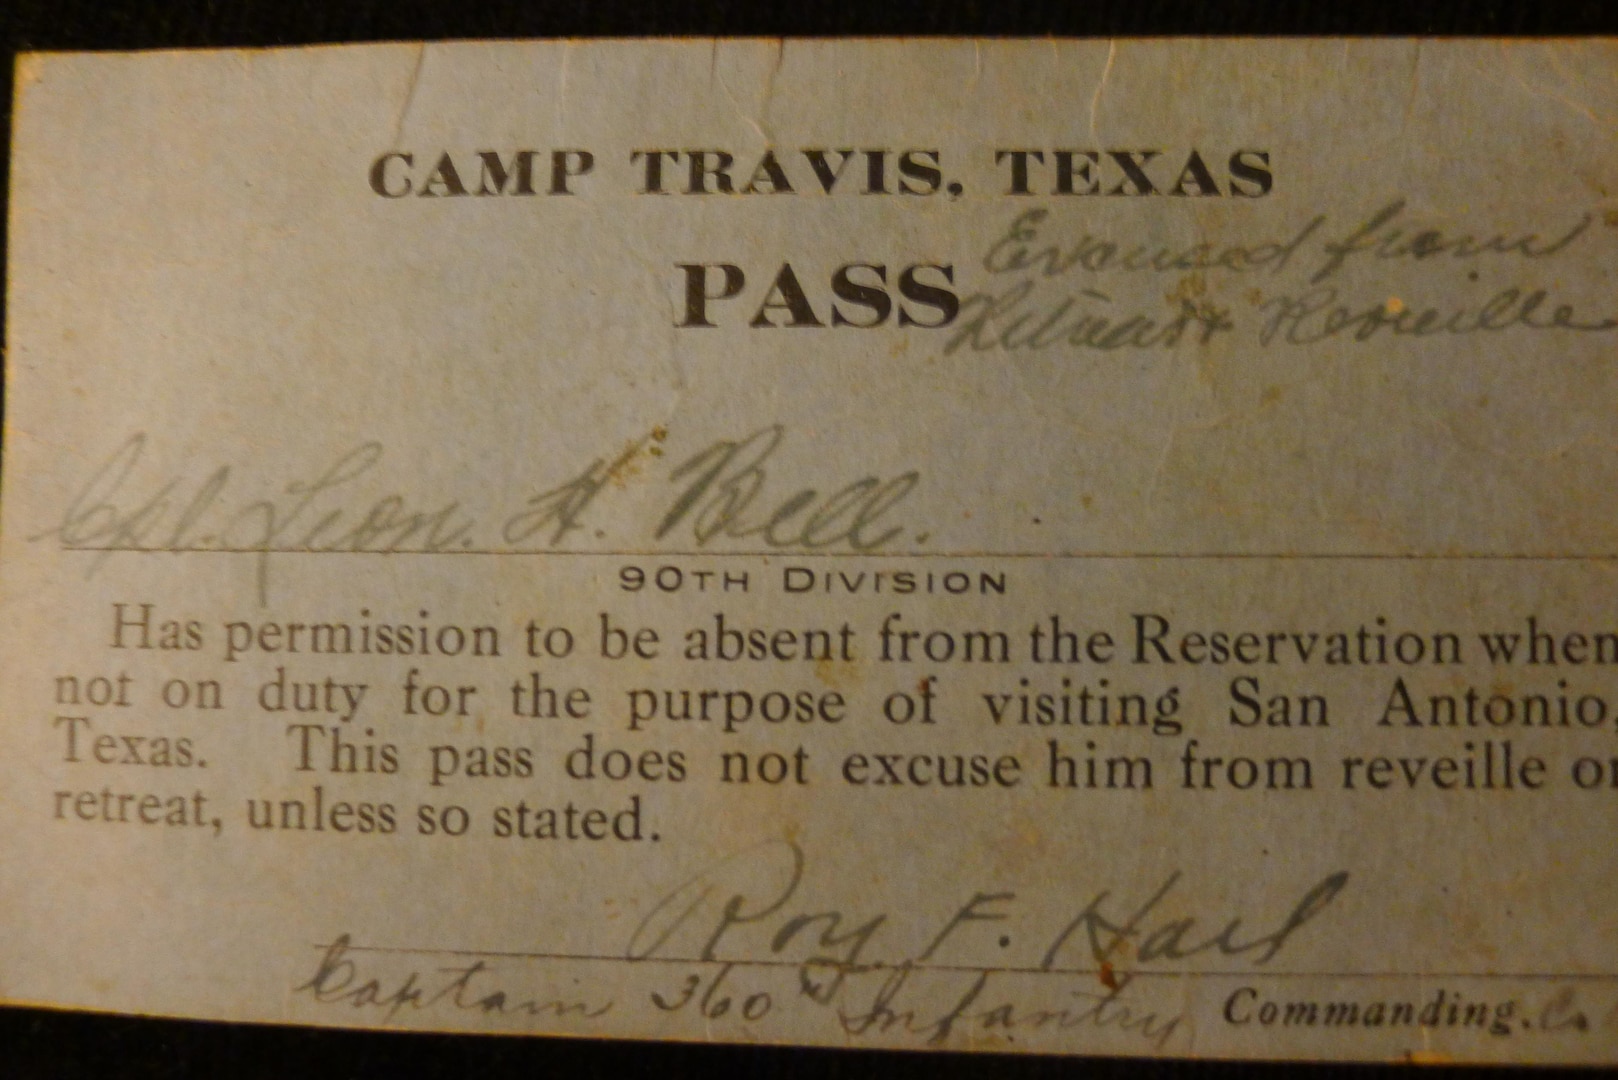 A liberty pass, signed  by Sgt. Leon Bell's commanding officer, Army Capt. Roy F. Hall, allowed Bell to be away from duty at Camp Travis, Texas, to see the sights of San Antonio. 